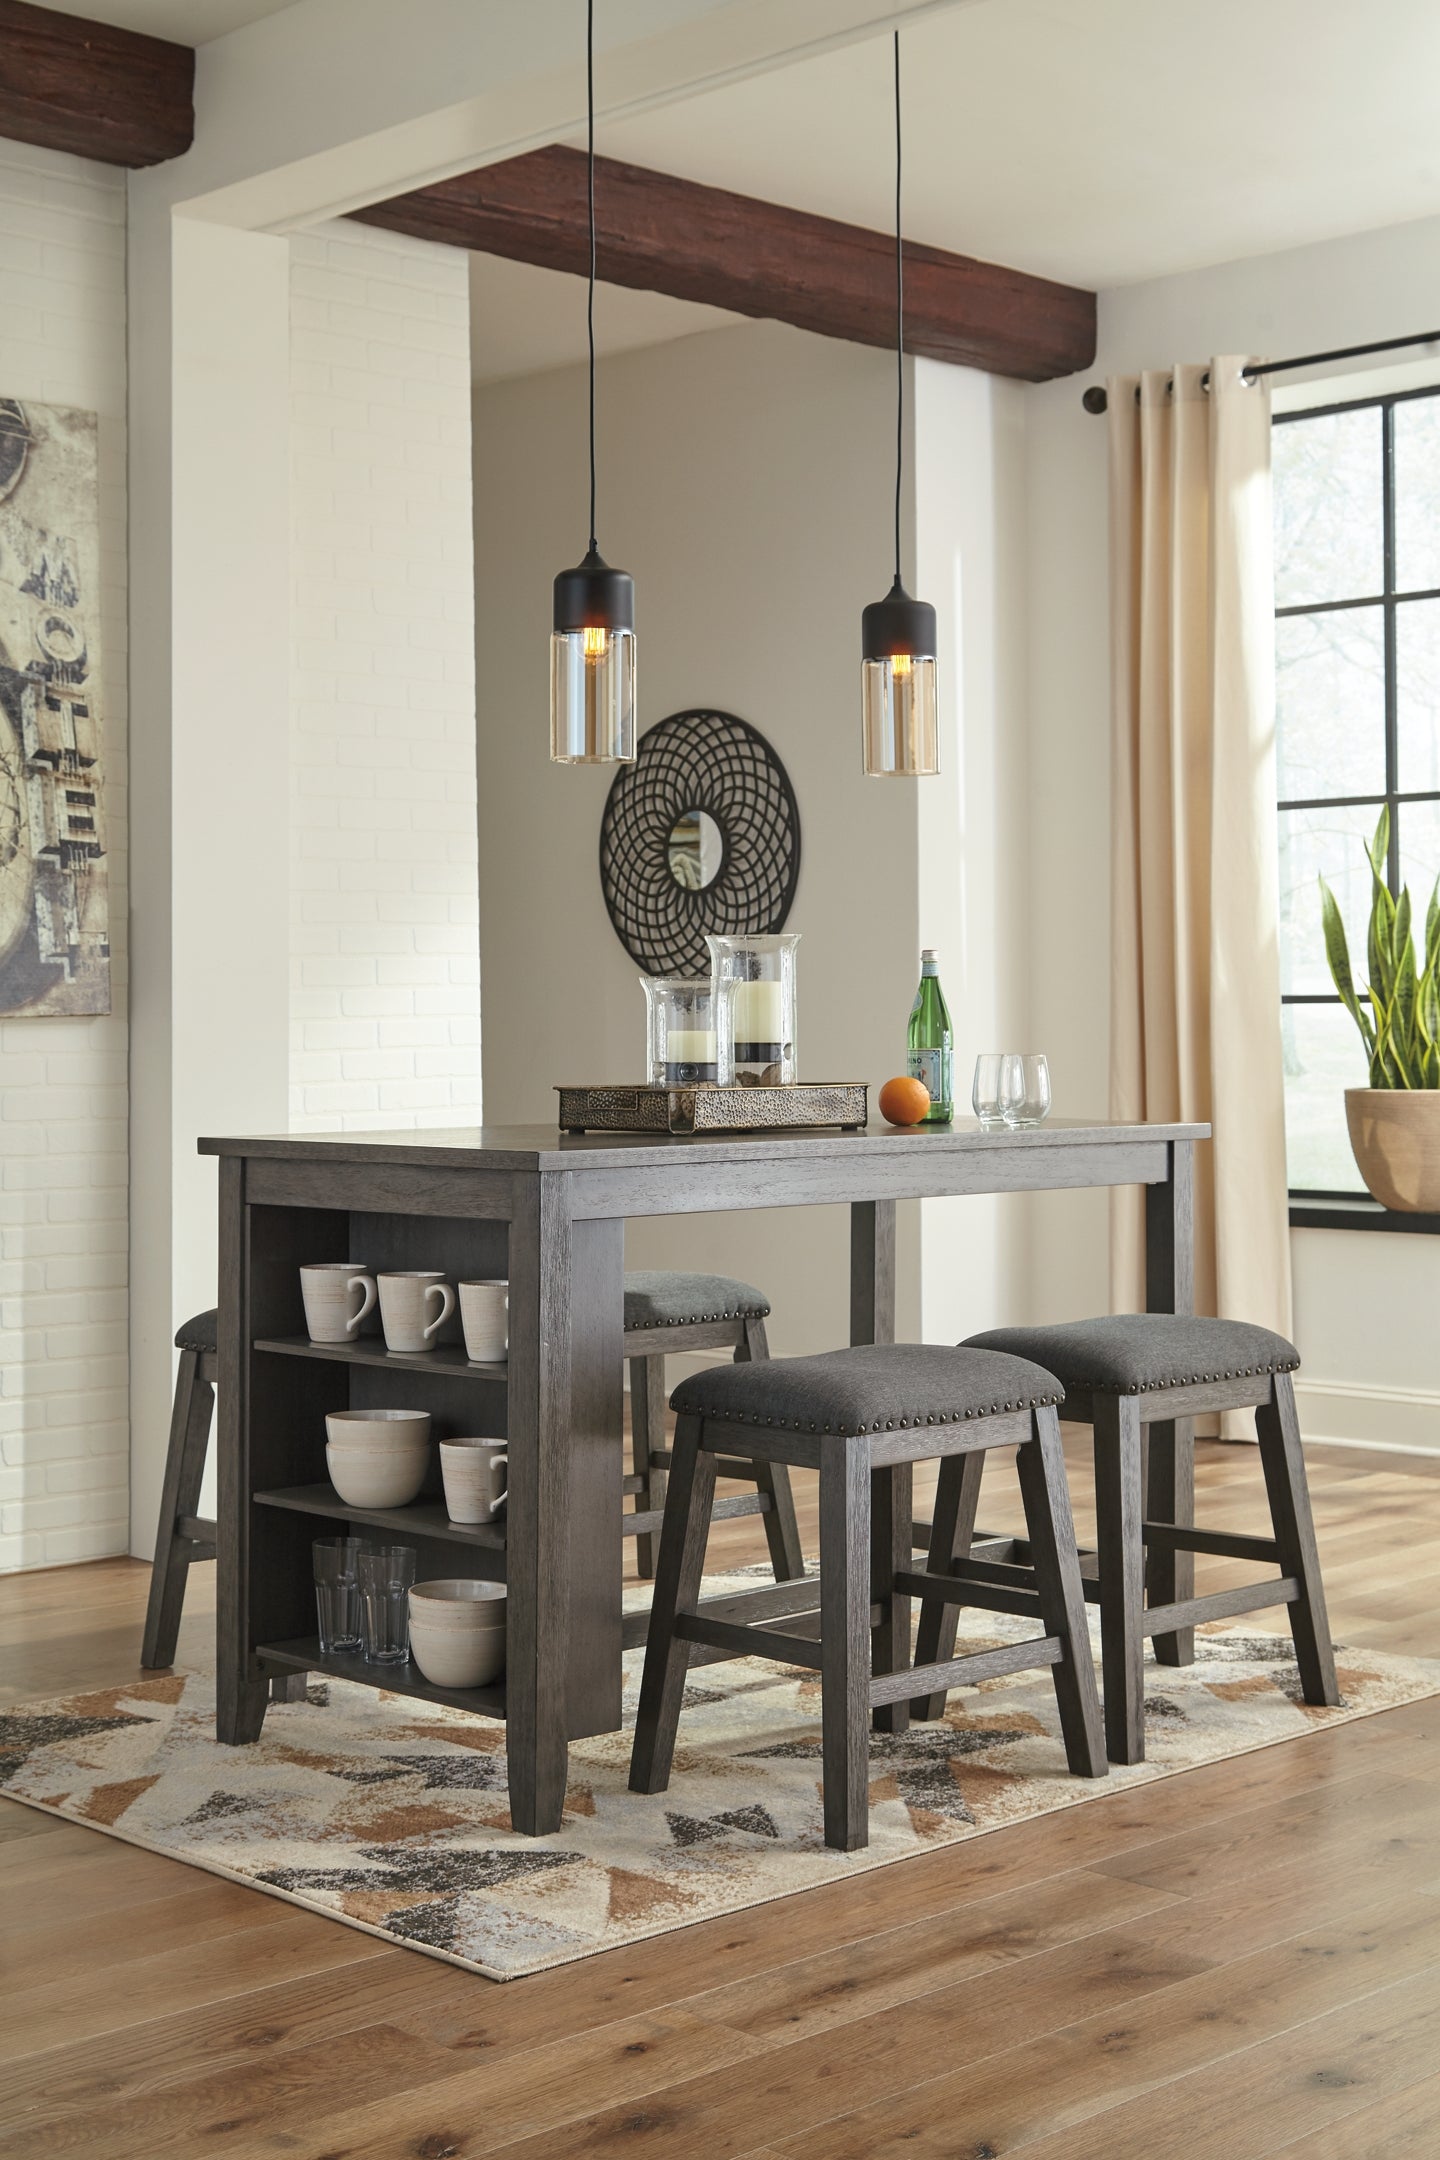 Ashley Express - Caitbrook Counter Height Dining Table and 4 Barstools